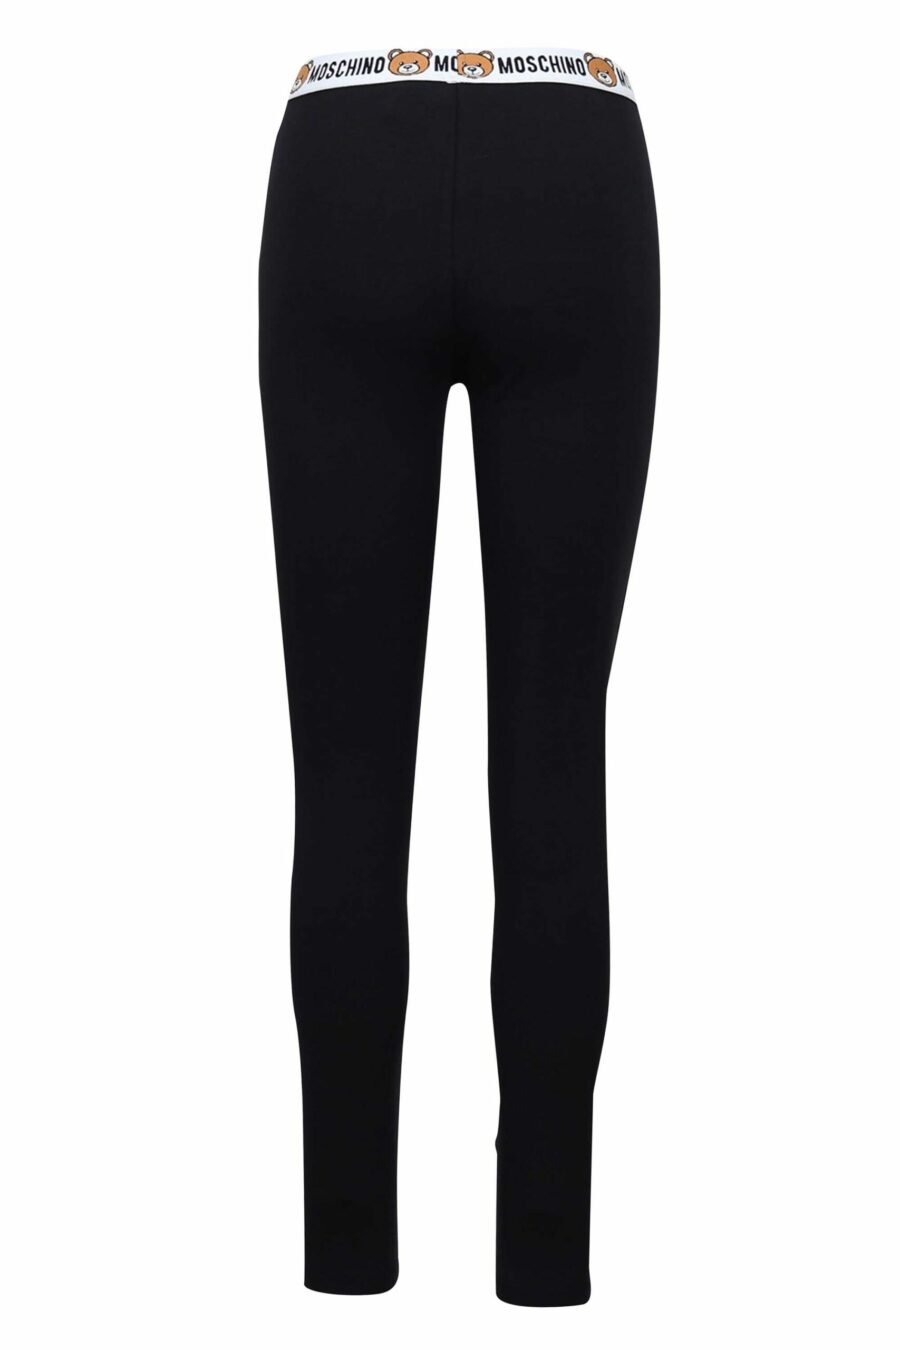 Tracksuit bottoms black with logo on waistband - 889316615418 1 scaled